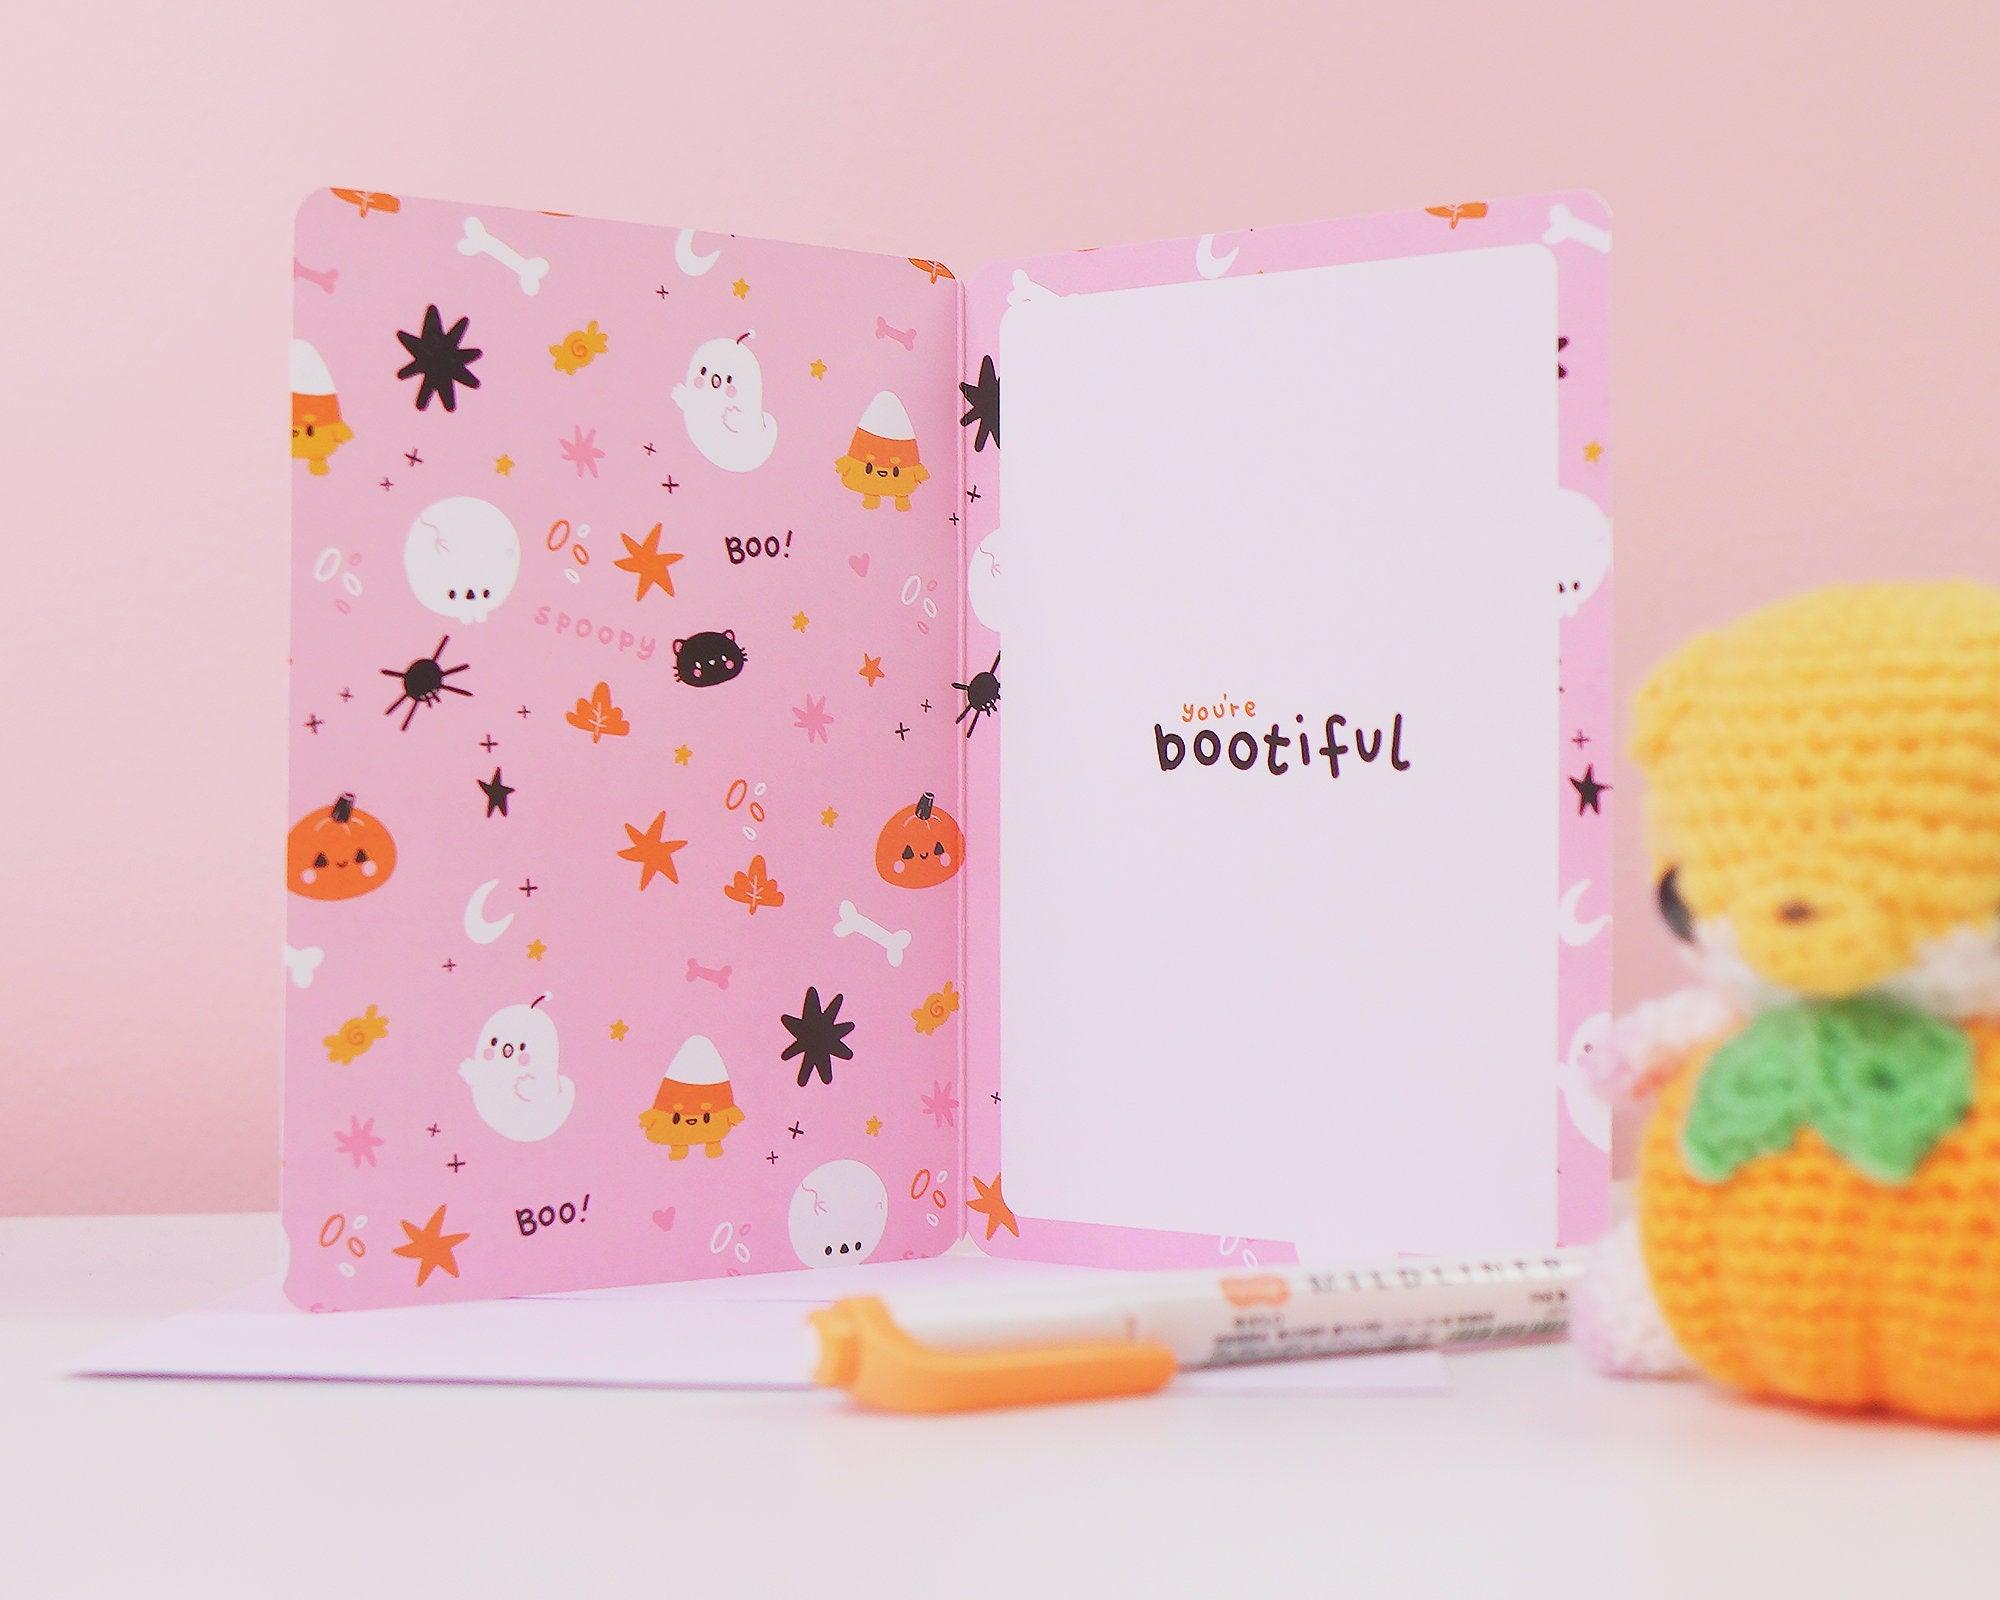 You are Boo-tiful ~ Cute Spooky Halloween Cards - Katnipp Illustrations